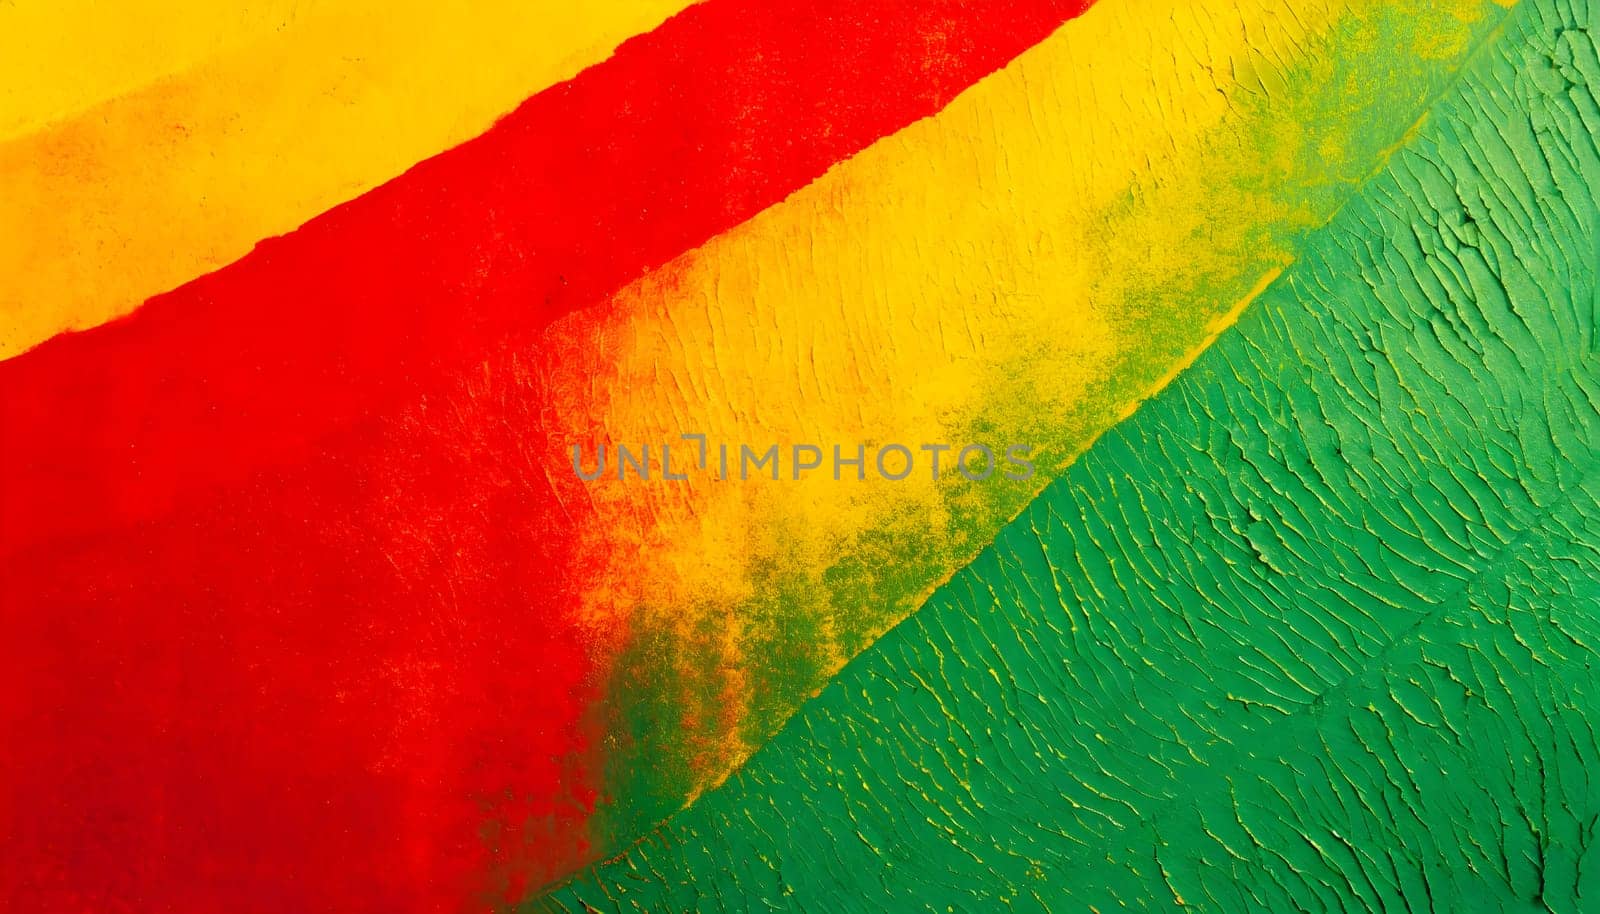 Black History Month, artwork grunge texture, red yellow green paint color, celebration Black History Month background by Designlab